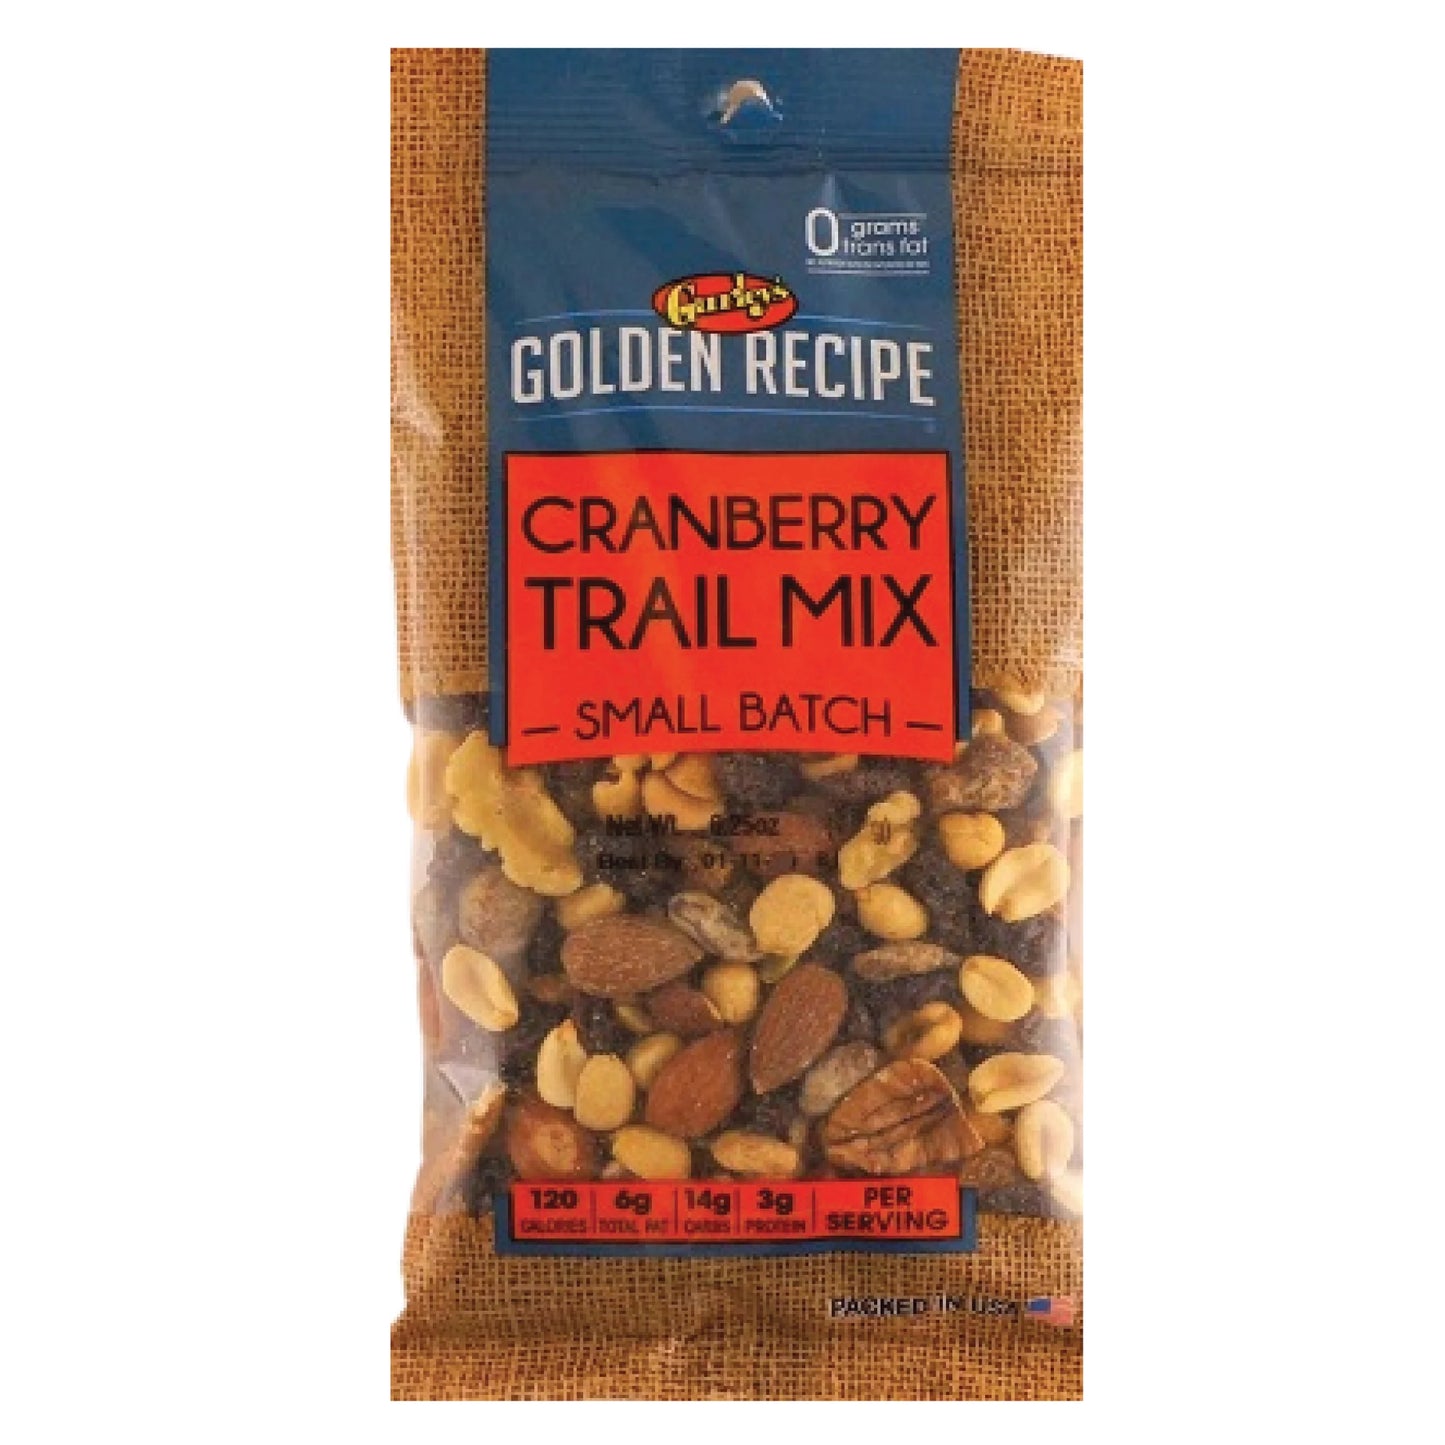 Gurley’s Golden Recipe Cranberry Trail Mix Small Batch 6oz (Pack of 8)